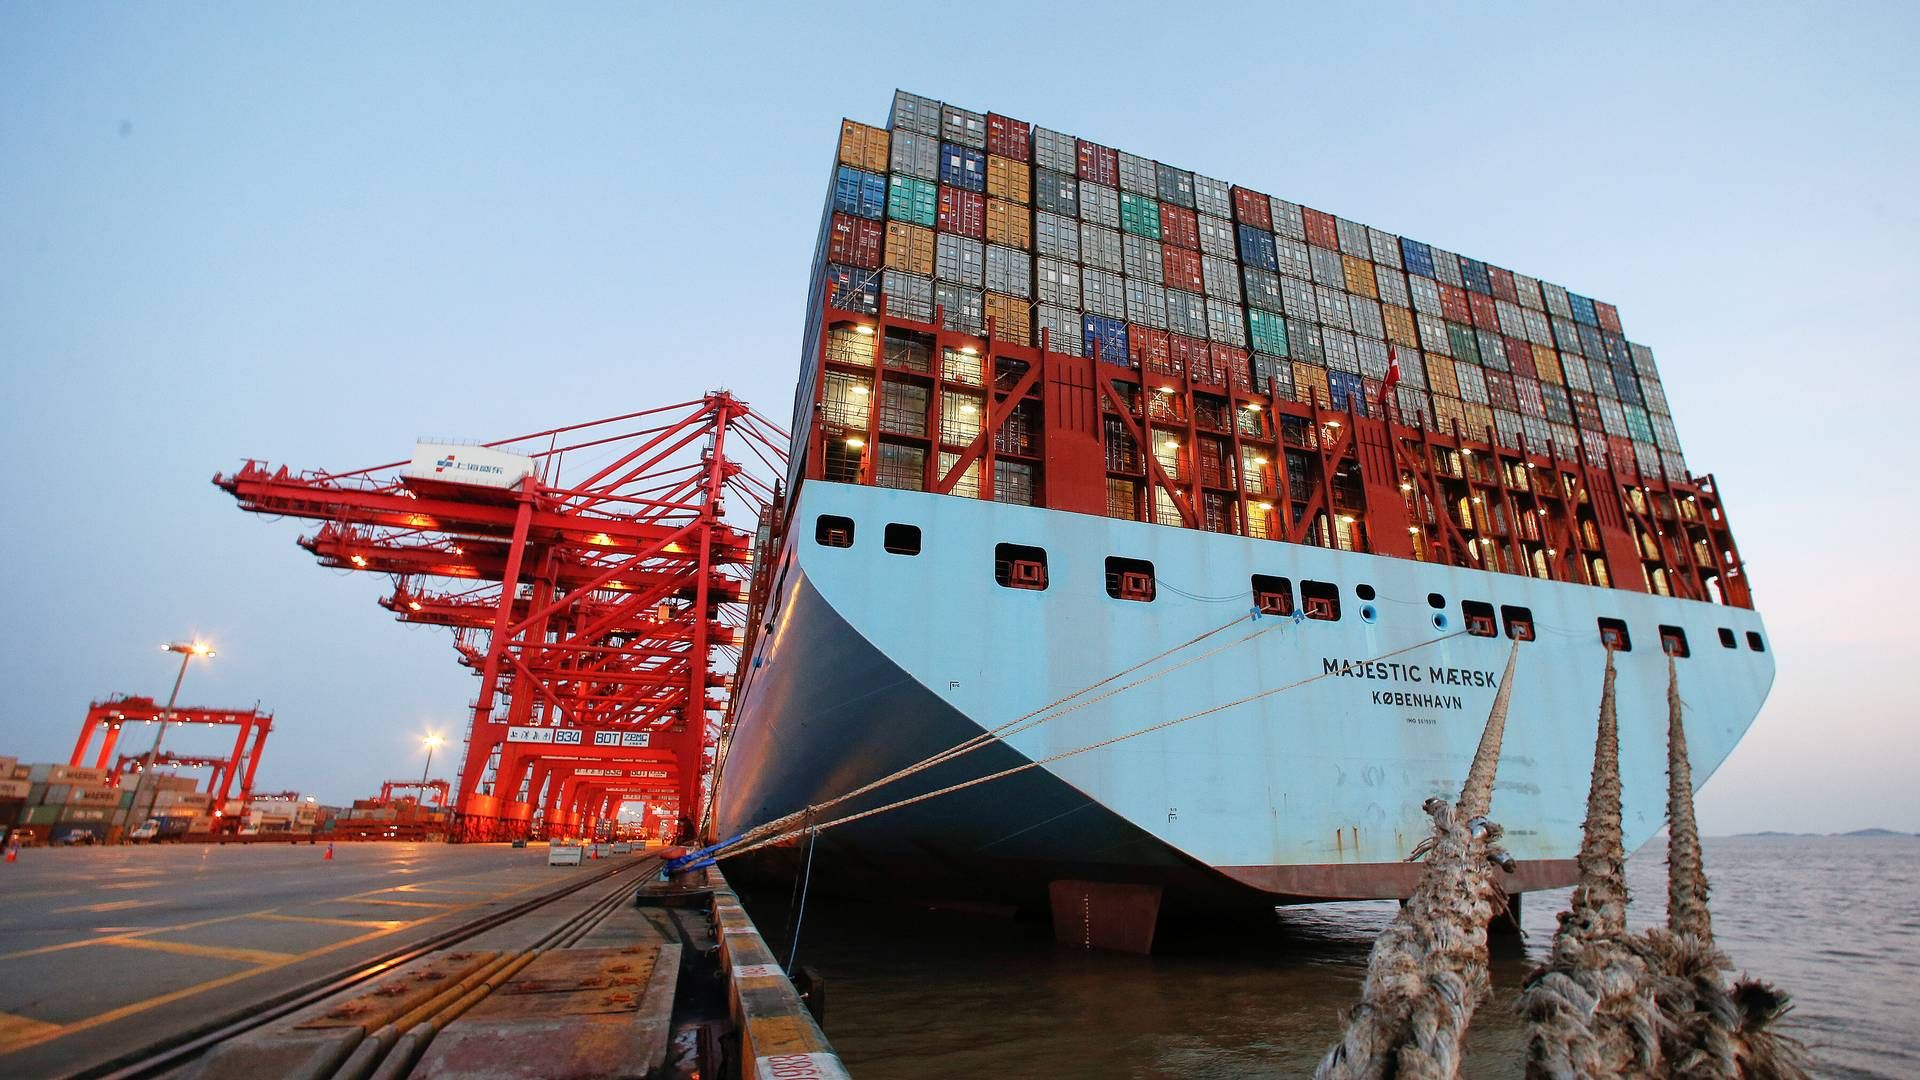 A Maersk triple-E container vessel docked at Shanghai. | Photo: Aly Song/reuters/ritzau Scanpix